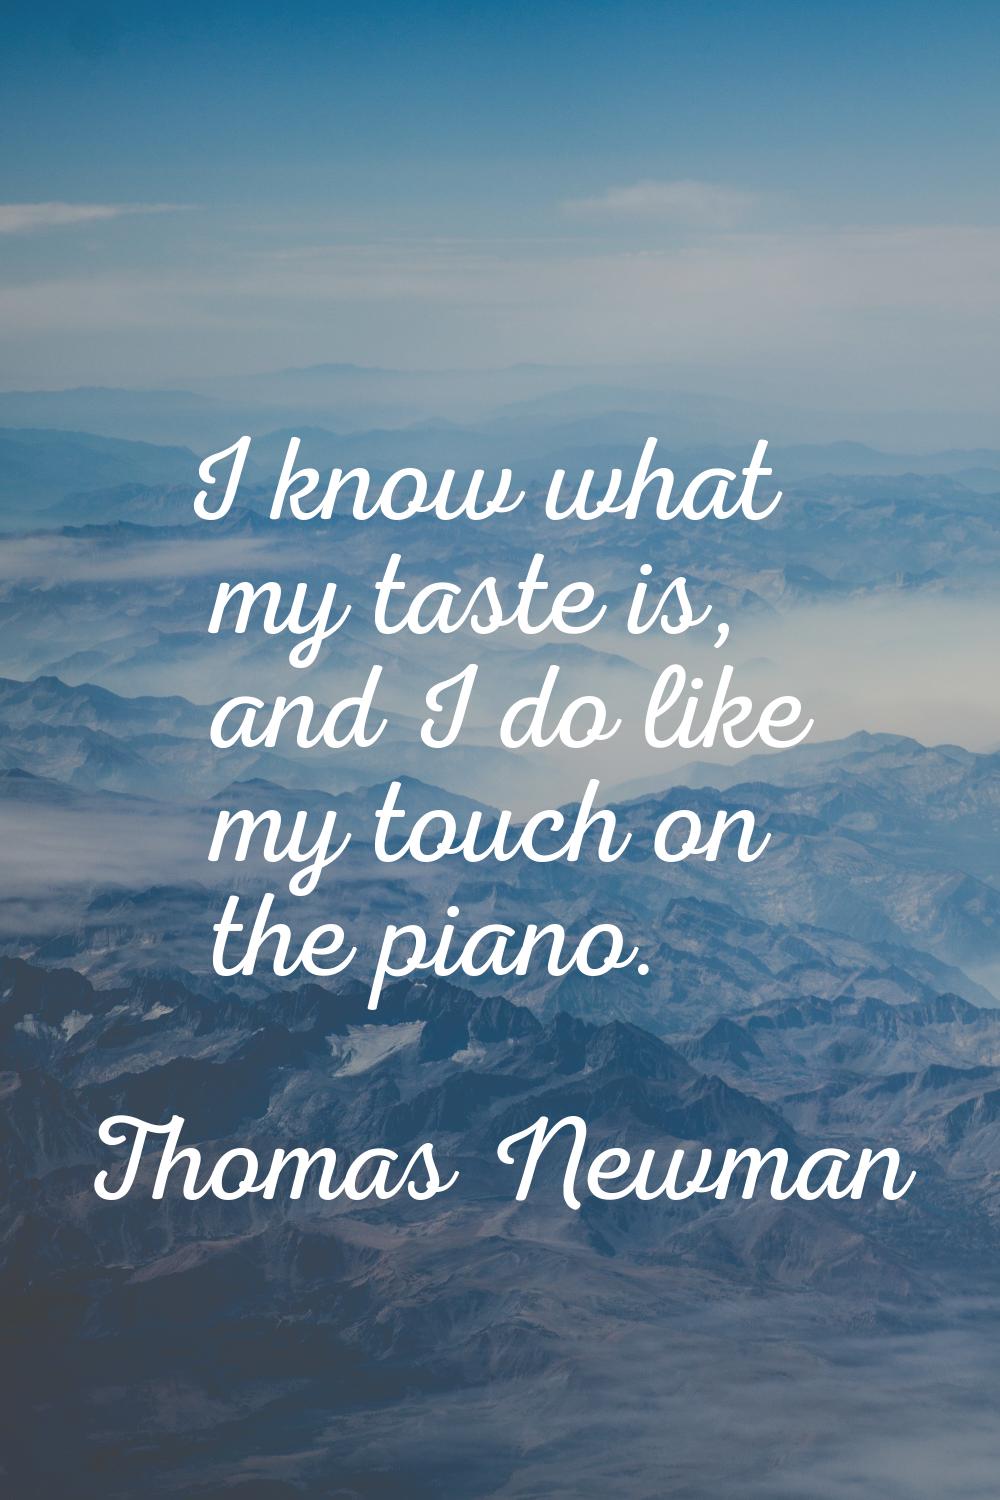 I know what my taste is, and I do like my touch on the piano.